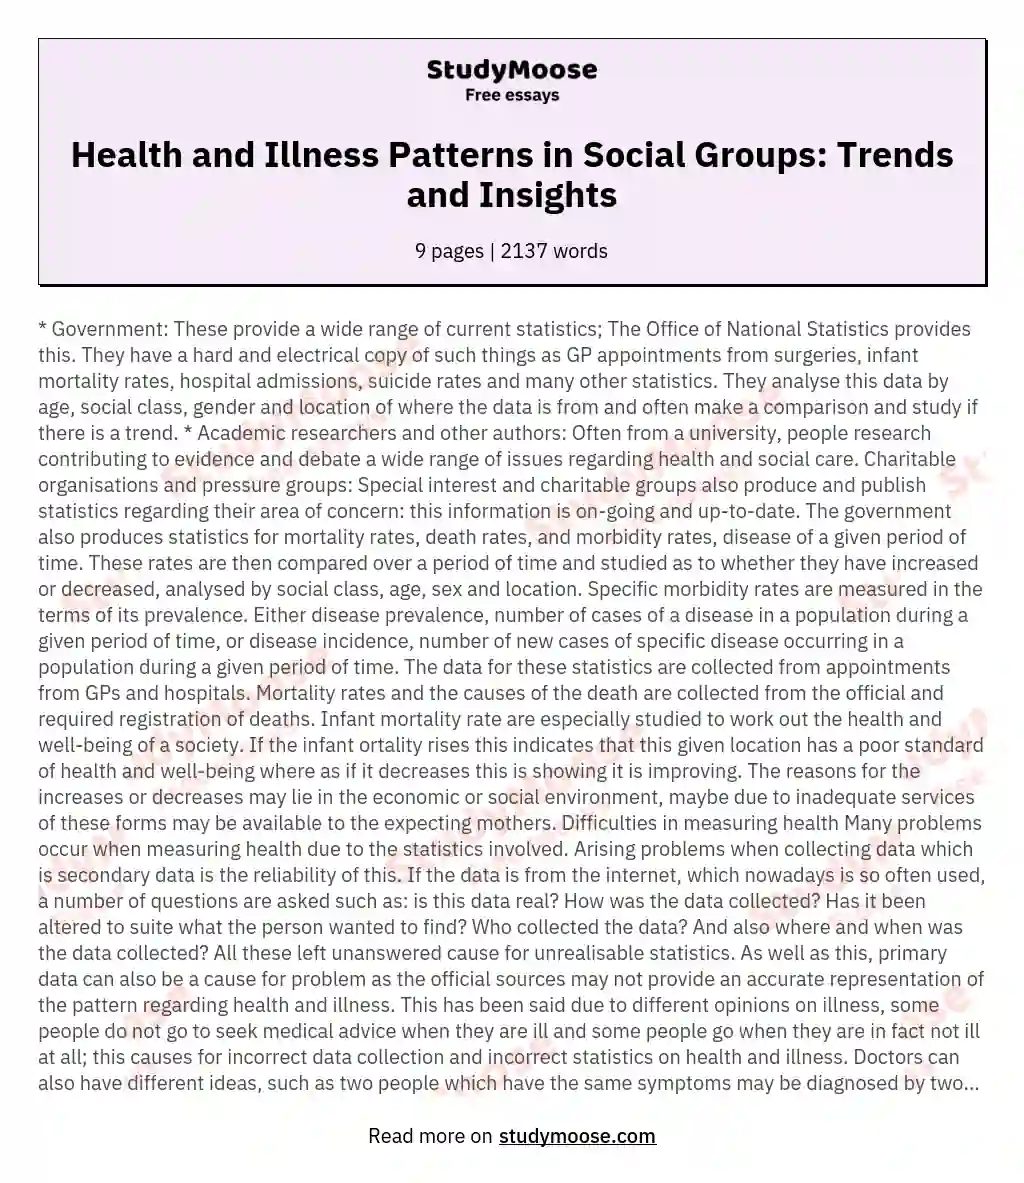 Health and Illness Patterns in Social Groups: Trends and Insights essay